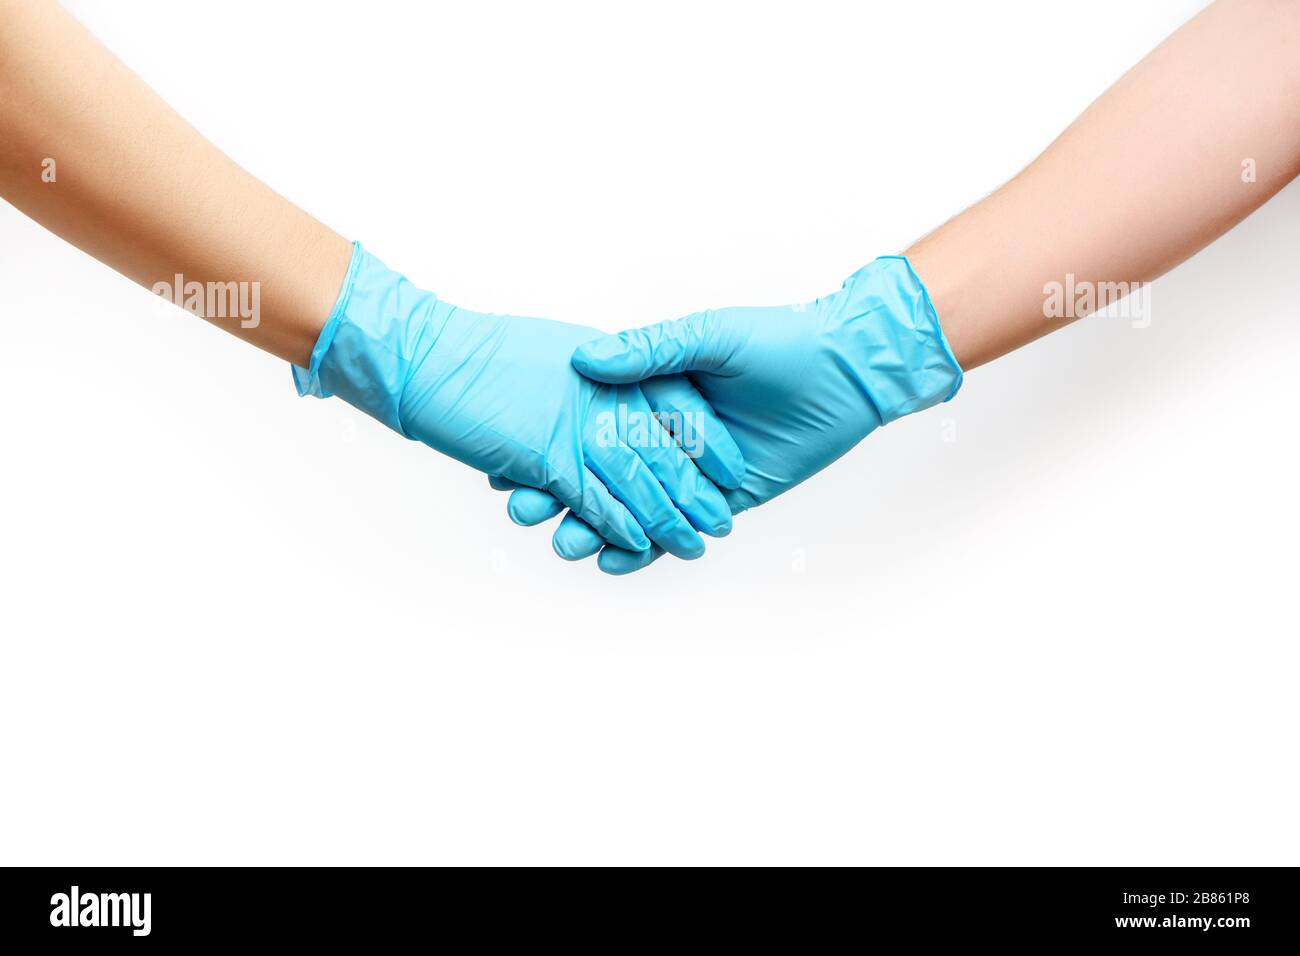 Handshake in blue medical gloves isolated on white background. Partial view. Stock Photo